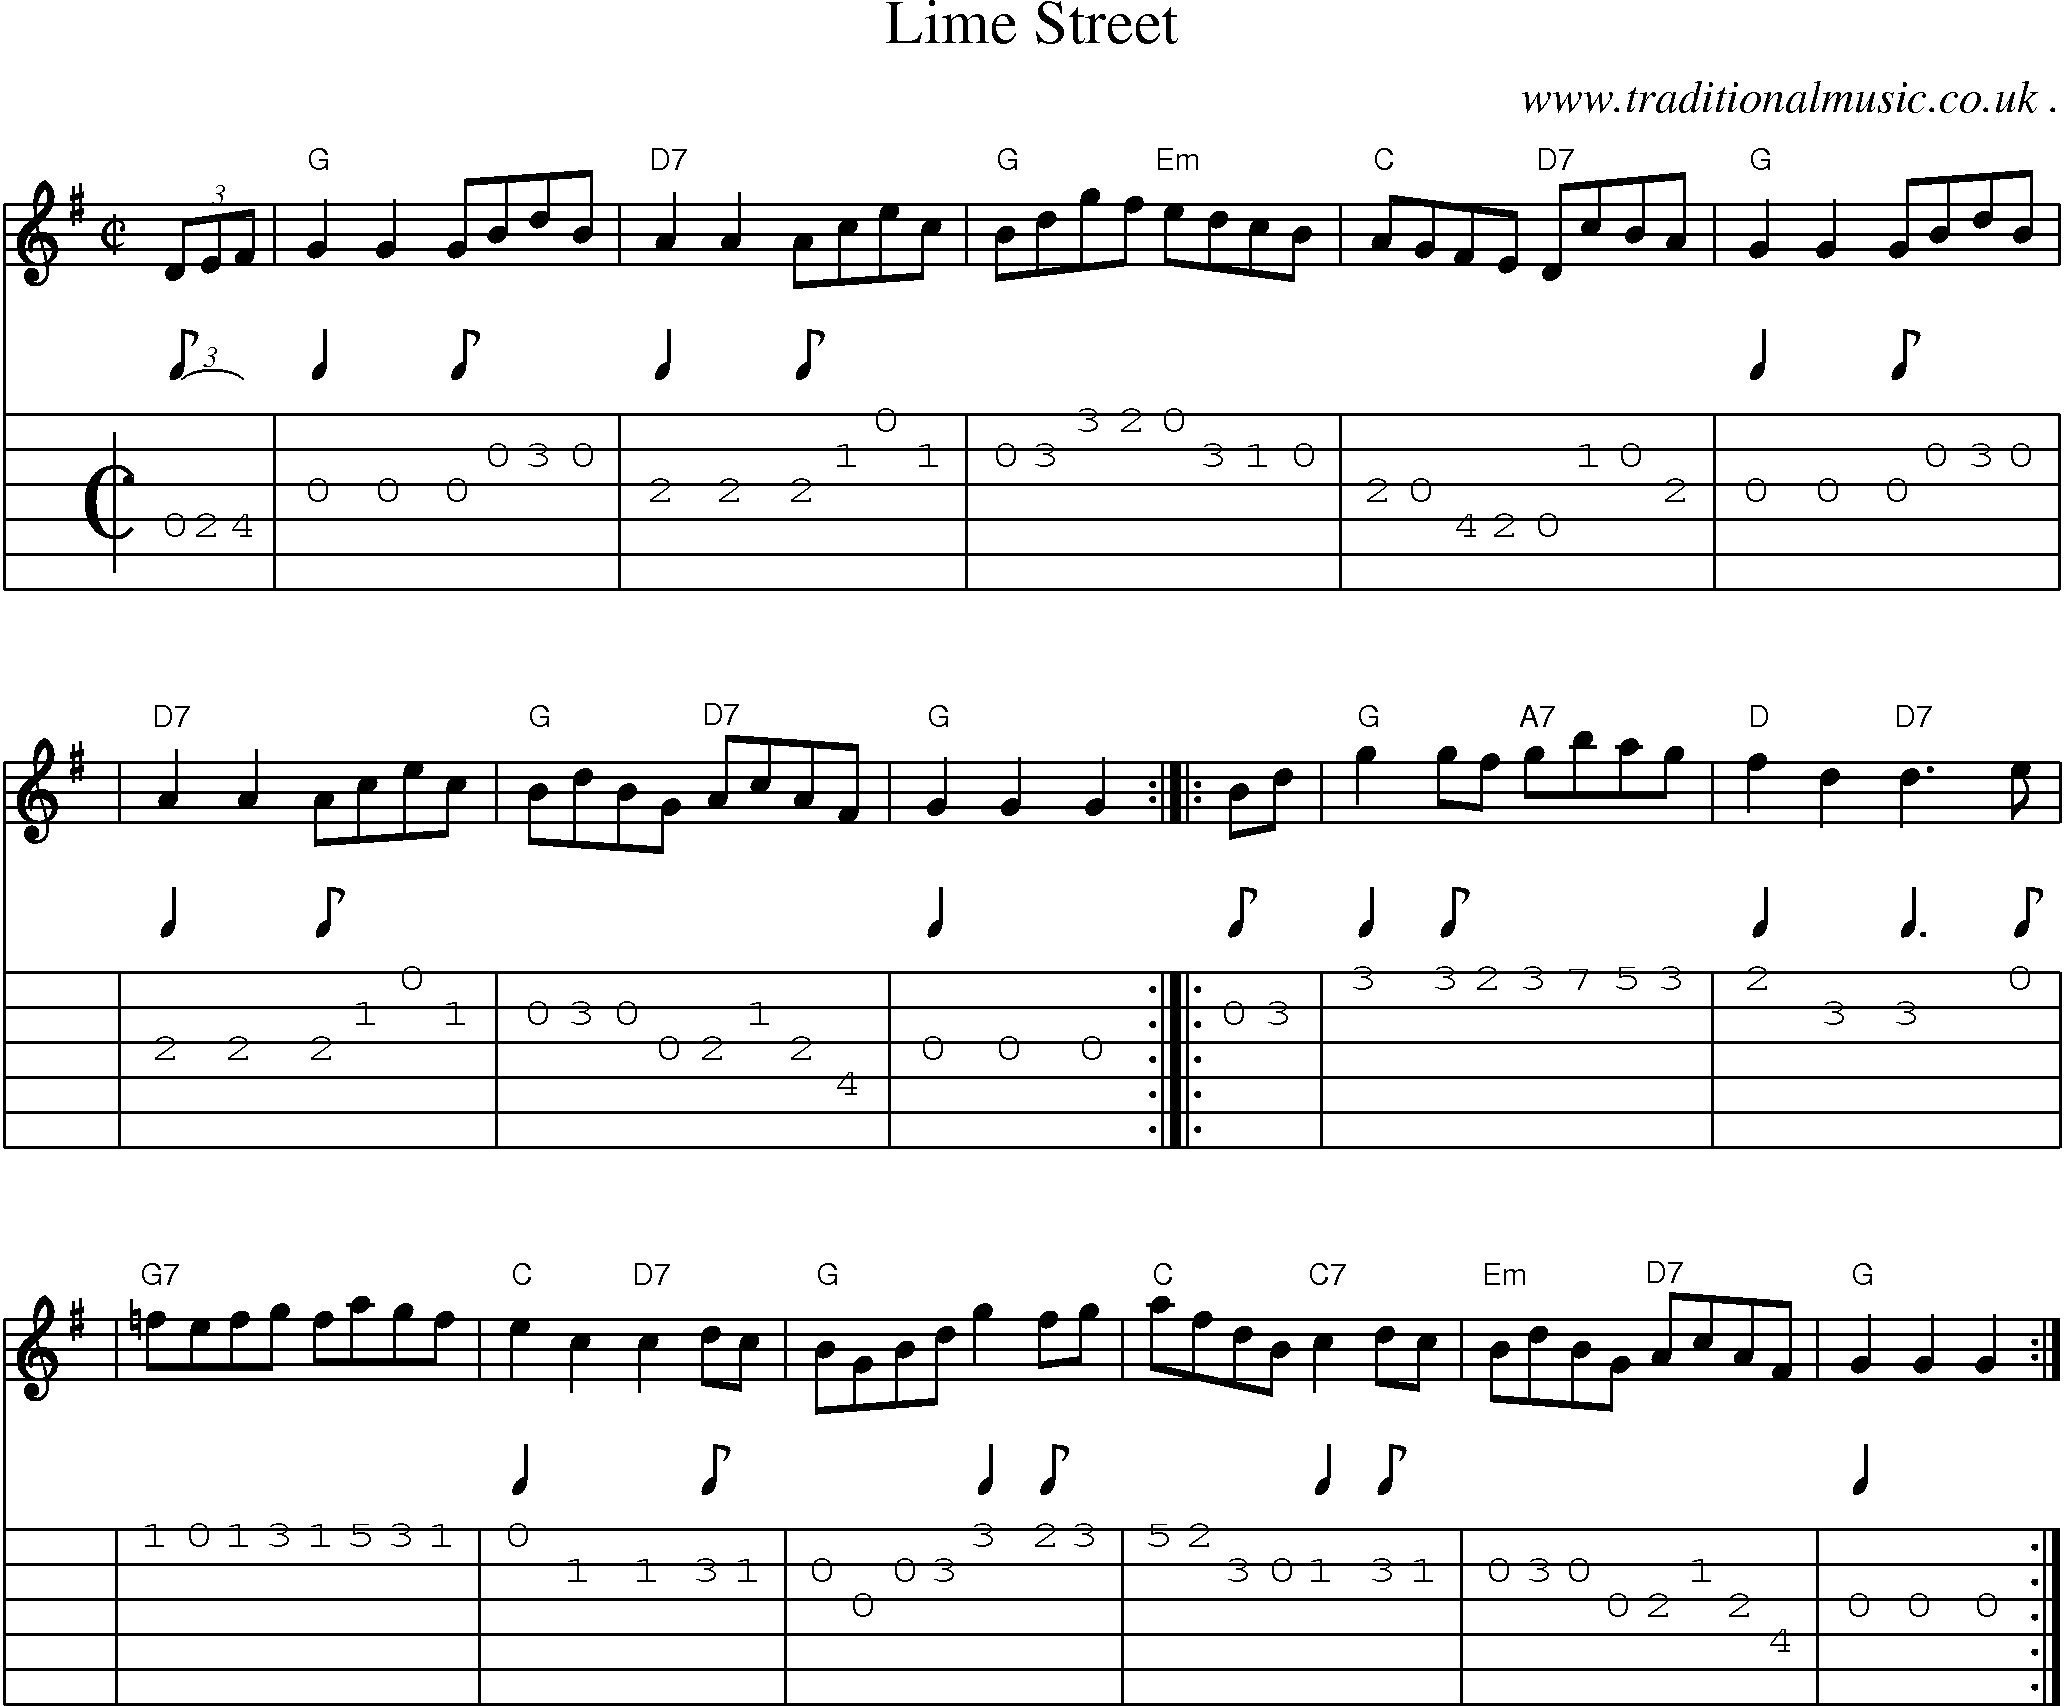 Sheet-music  score, Chords and Guitar Tabs for Lime Street